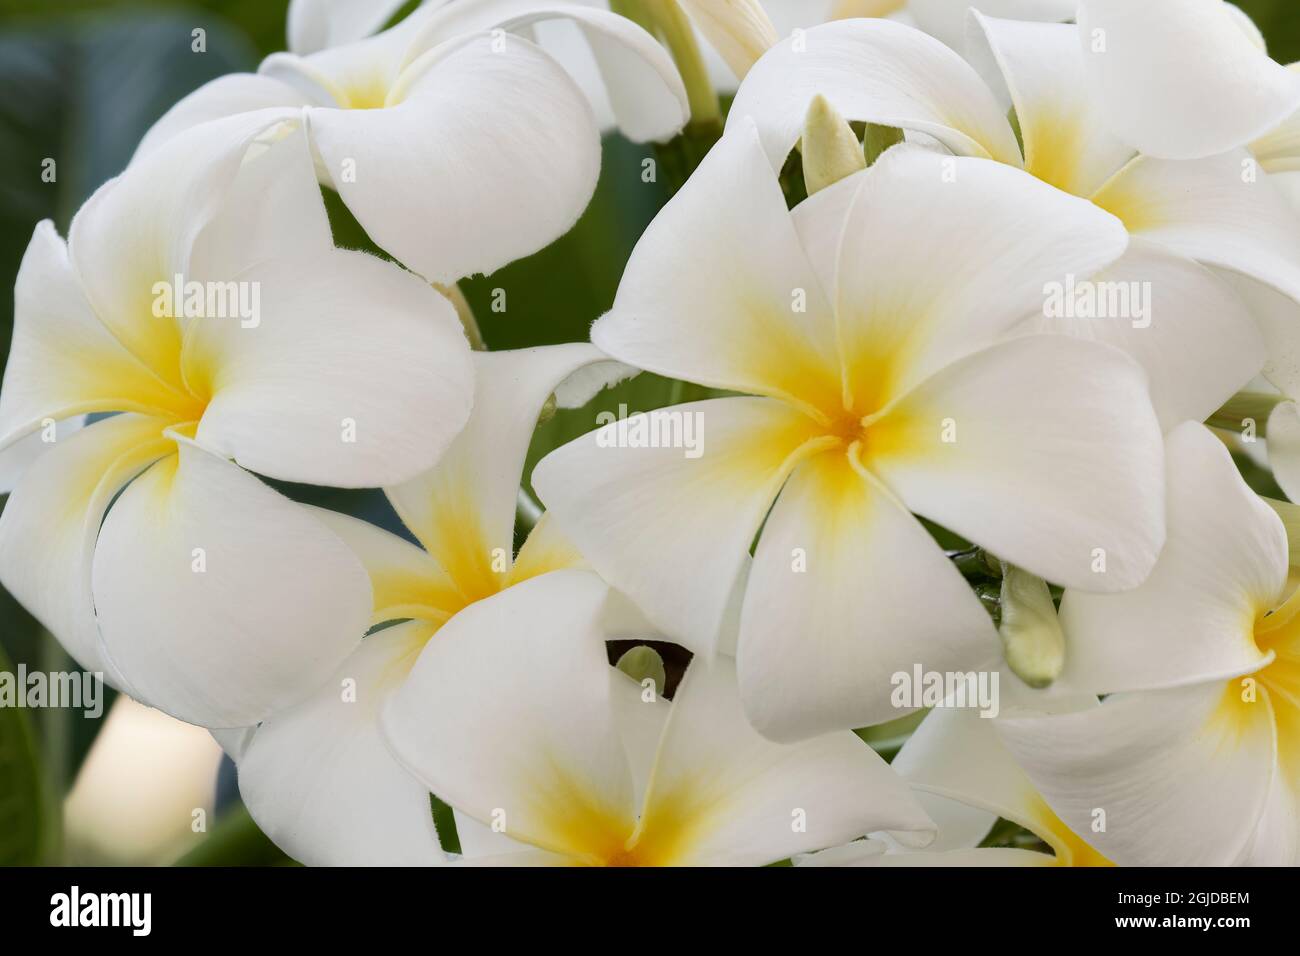 Plumeria a genus of flowering plants in the dogbane family, Apocynaceae, Maui, Hawaii. Stock Photo